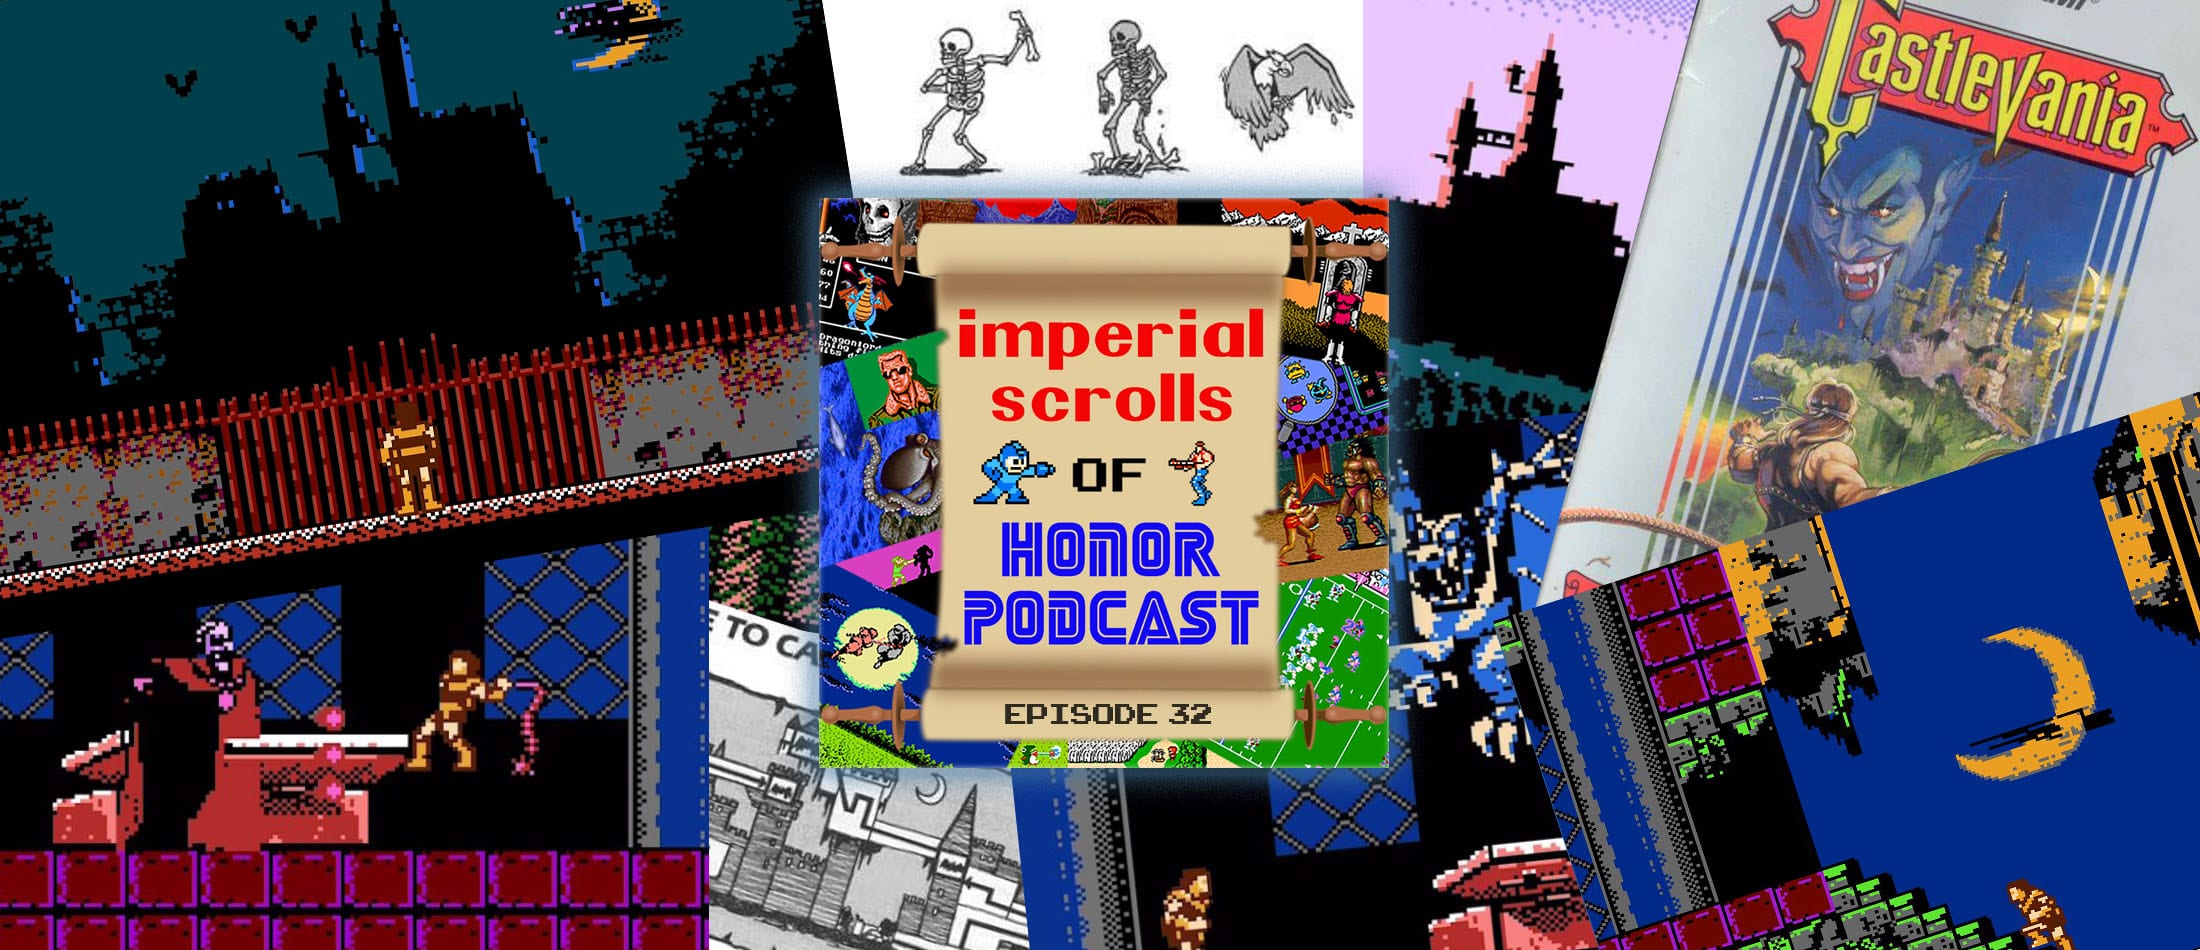 Imperial Scrolls of Honor Podcast - Ep 32 - Castlevania (NES)